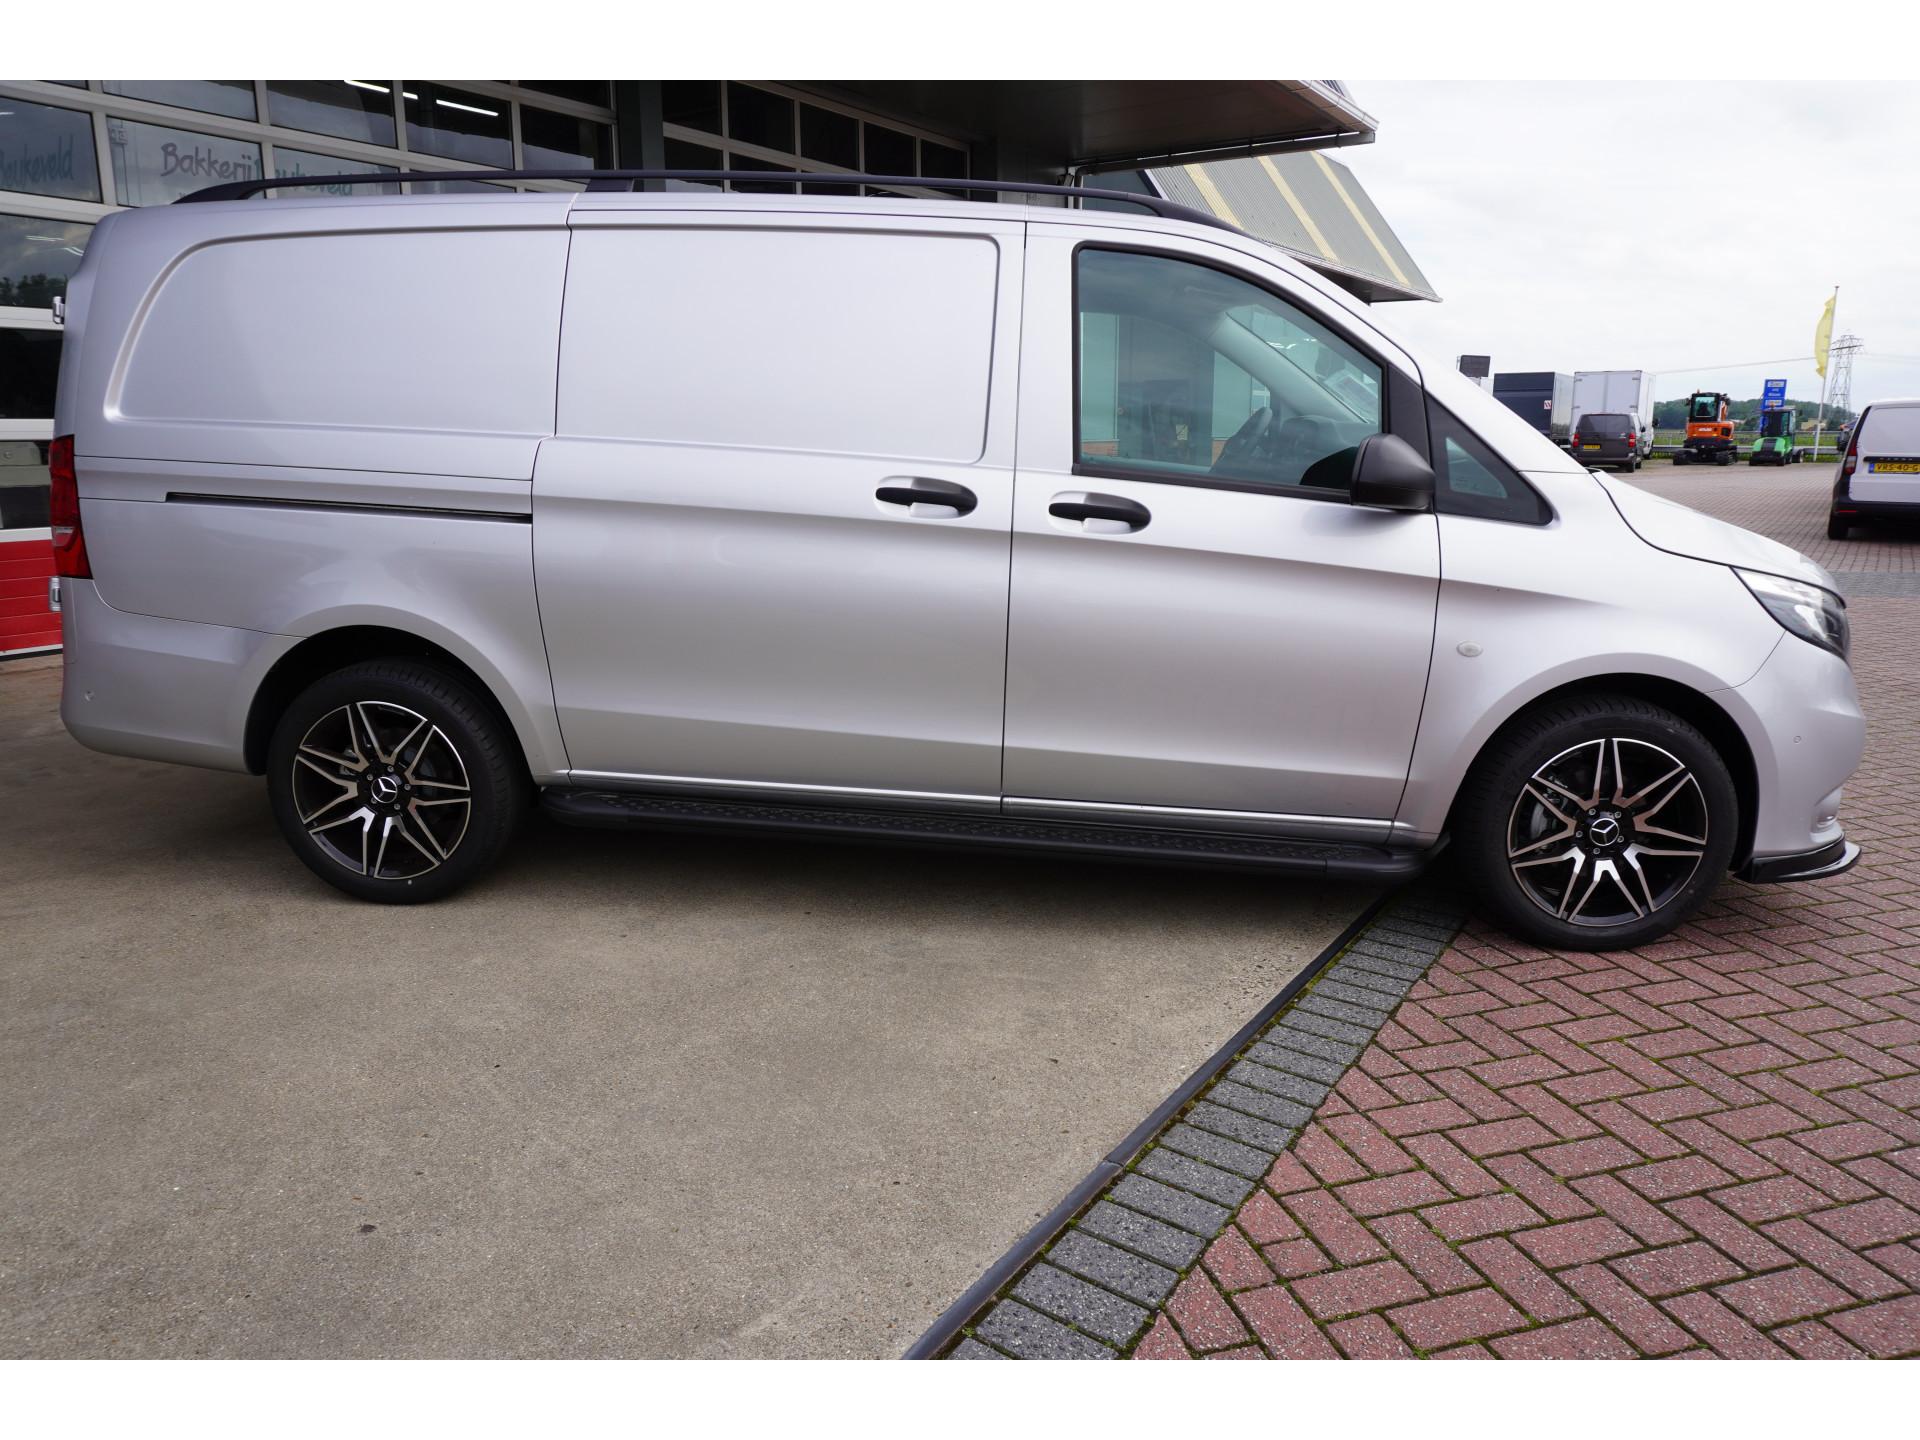 Mercedes-Benz Vito Kasten 116 CDI lang Standheizung*LED*NAVI used buy in  Norderstedt Price 13900 eur - Int.Nr.: NO-493 SOLD